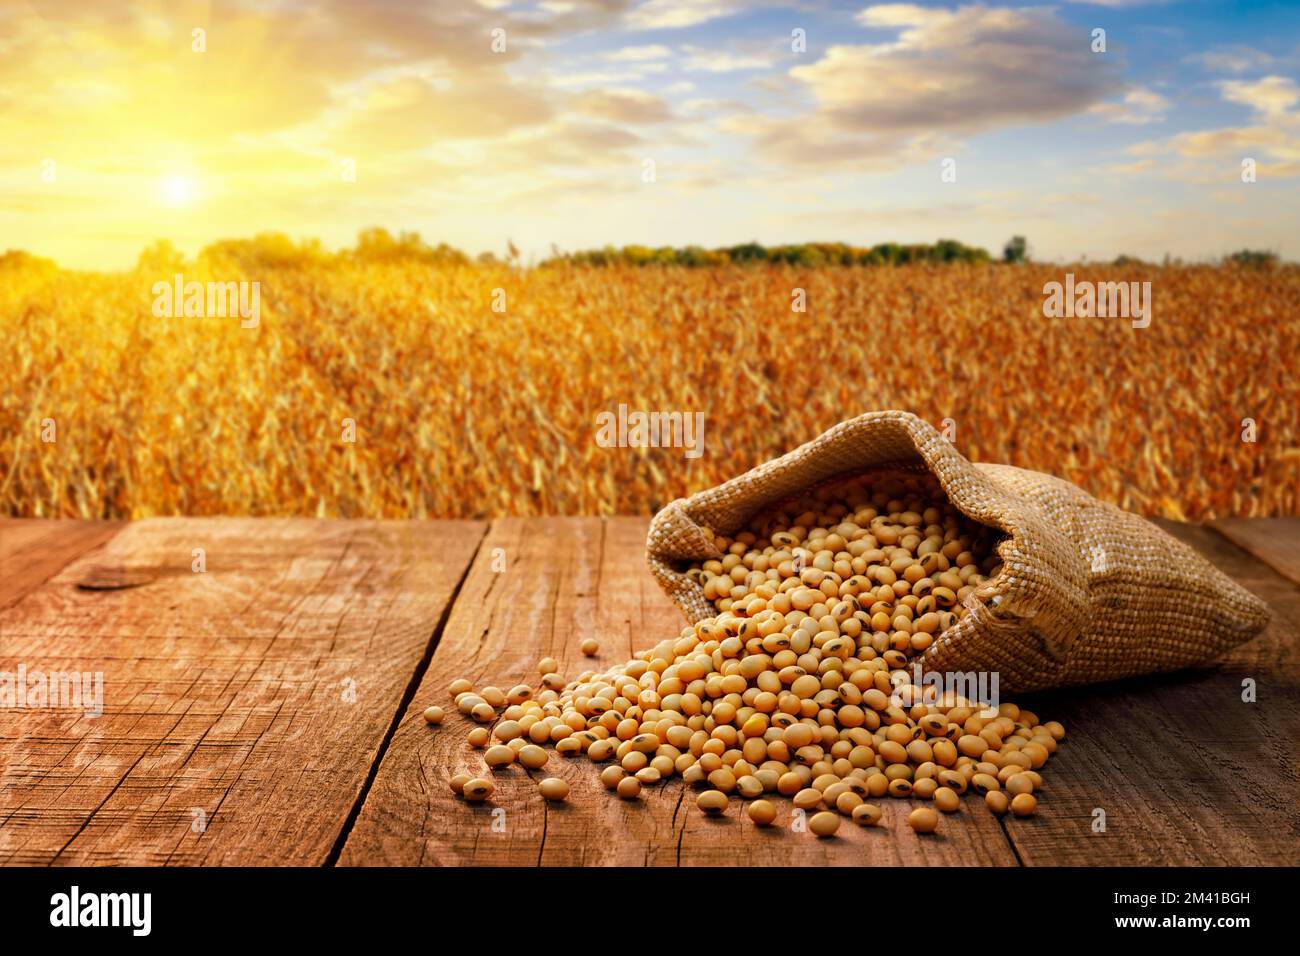 dried soybeans in burlap sack on table with ripe field on sunset Stock Photo